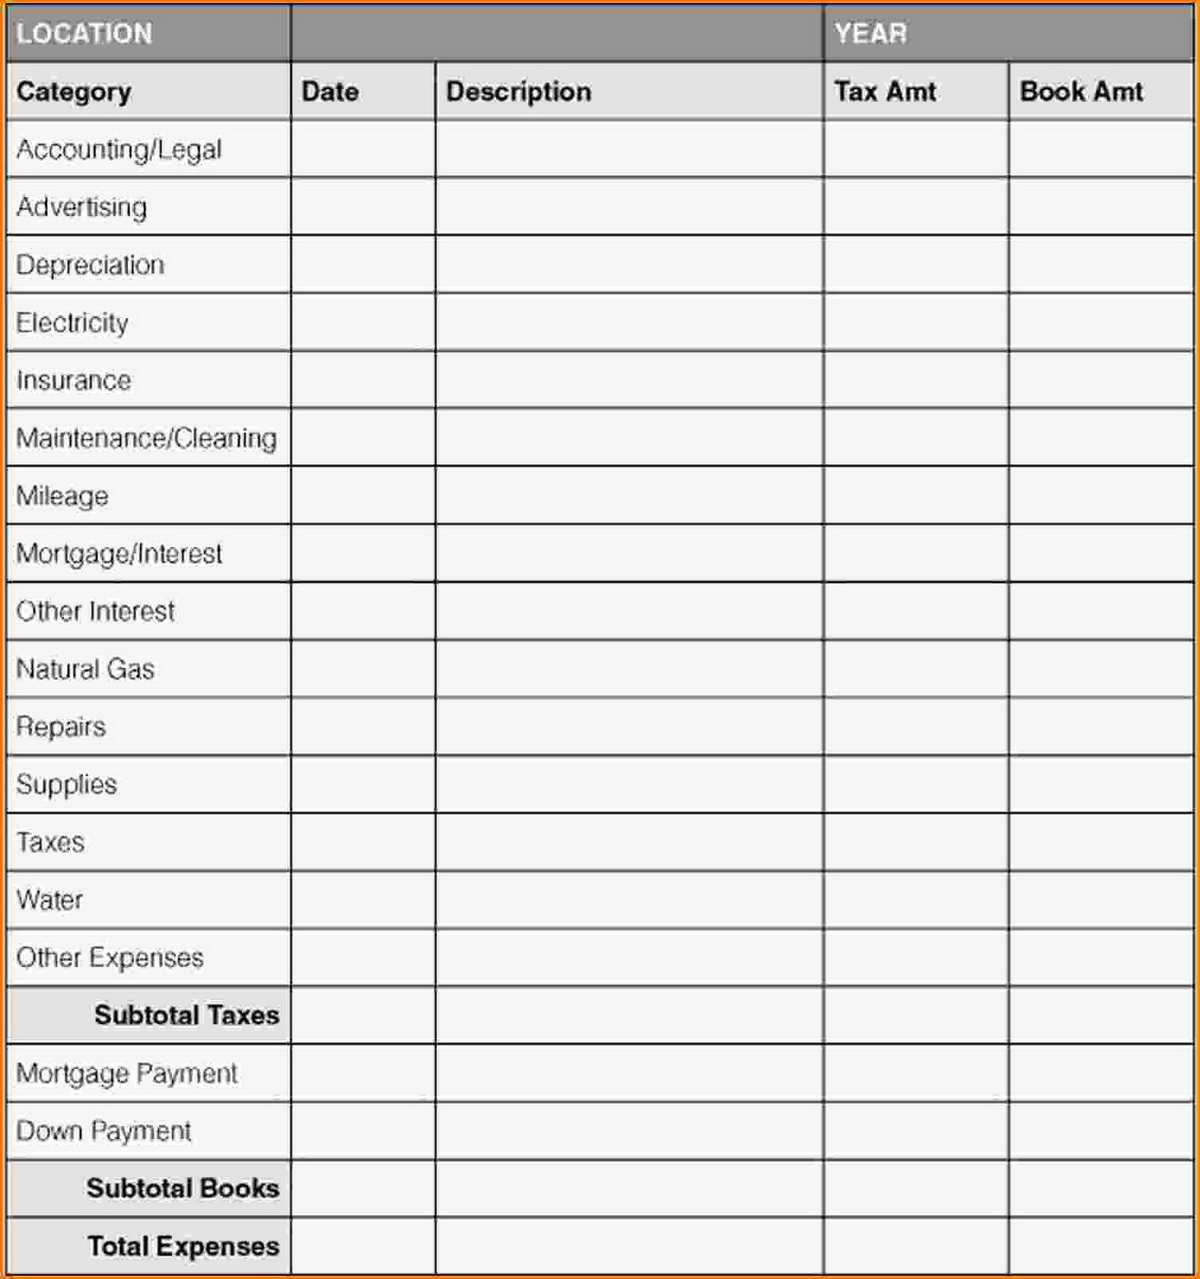 Business Expense Tracking Spreadsheet With Small Business Expenses Inside Business Expense Tracking Spreadsheet